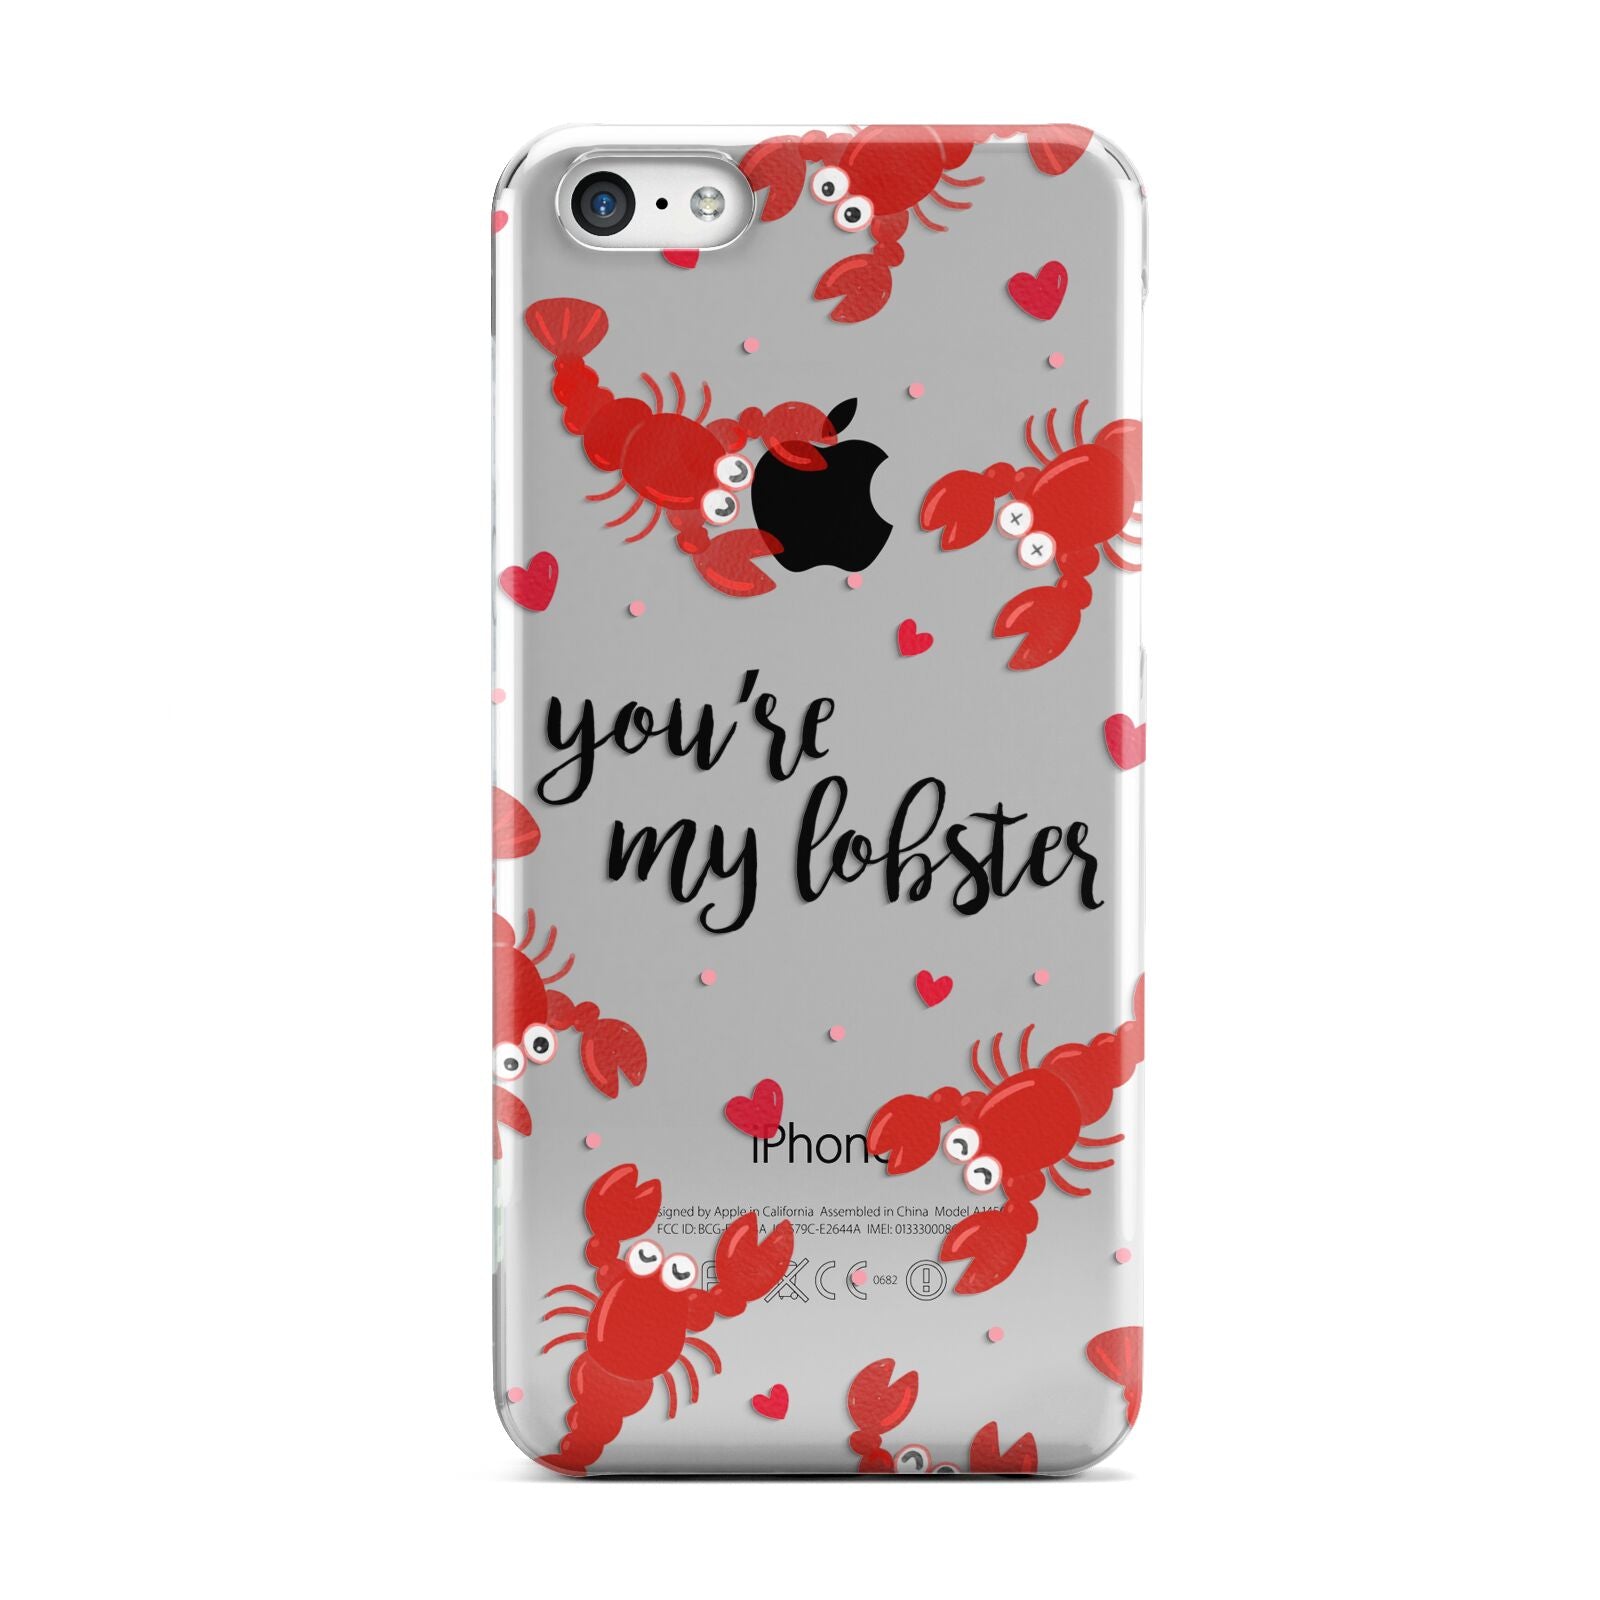 Youre My Lobster Apple iPhone 5c Case